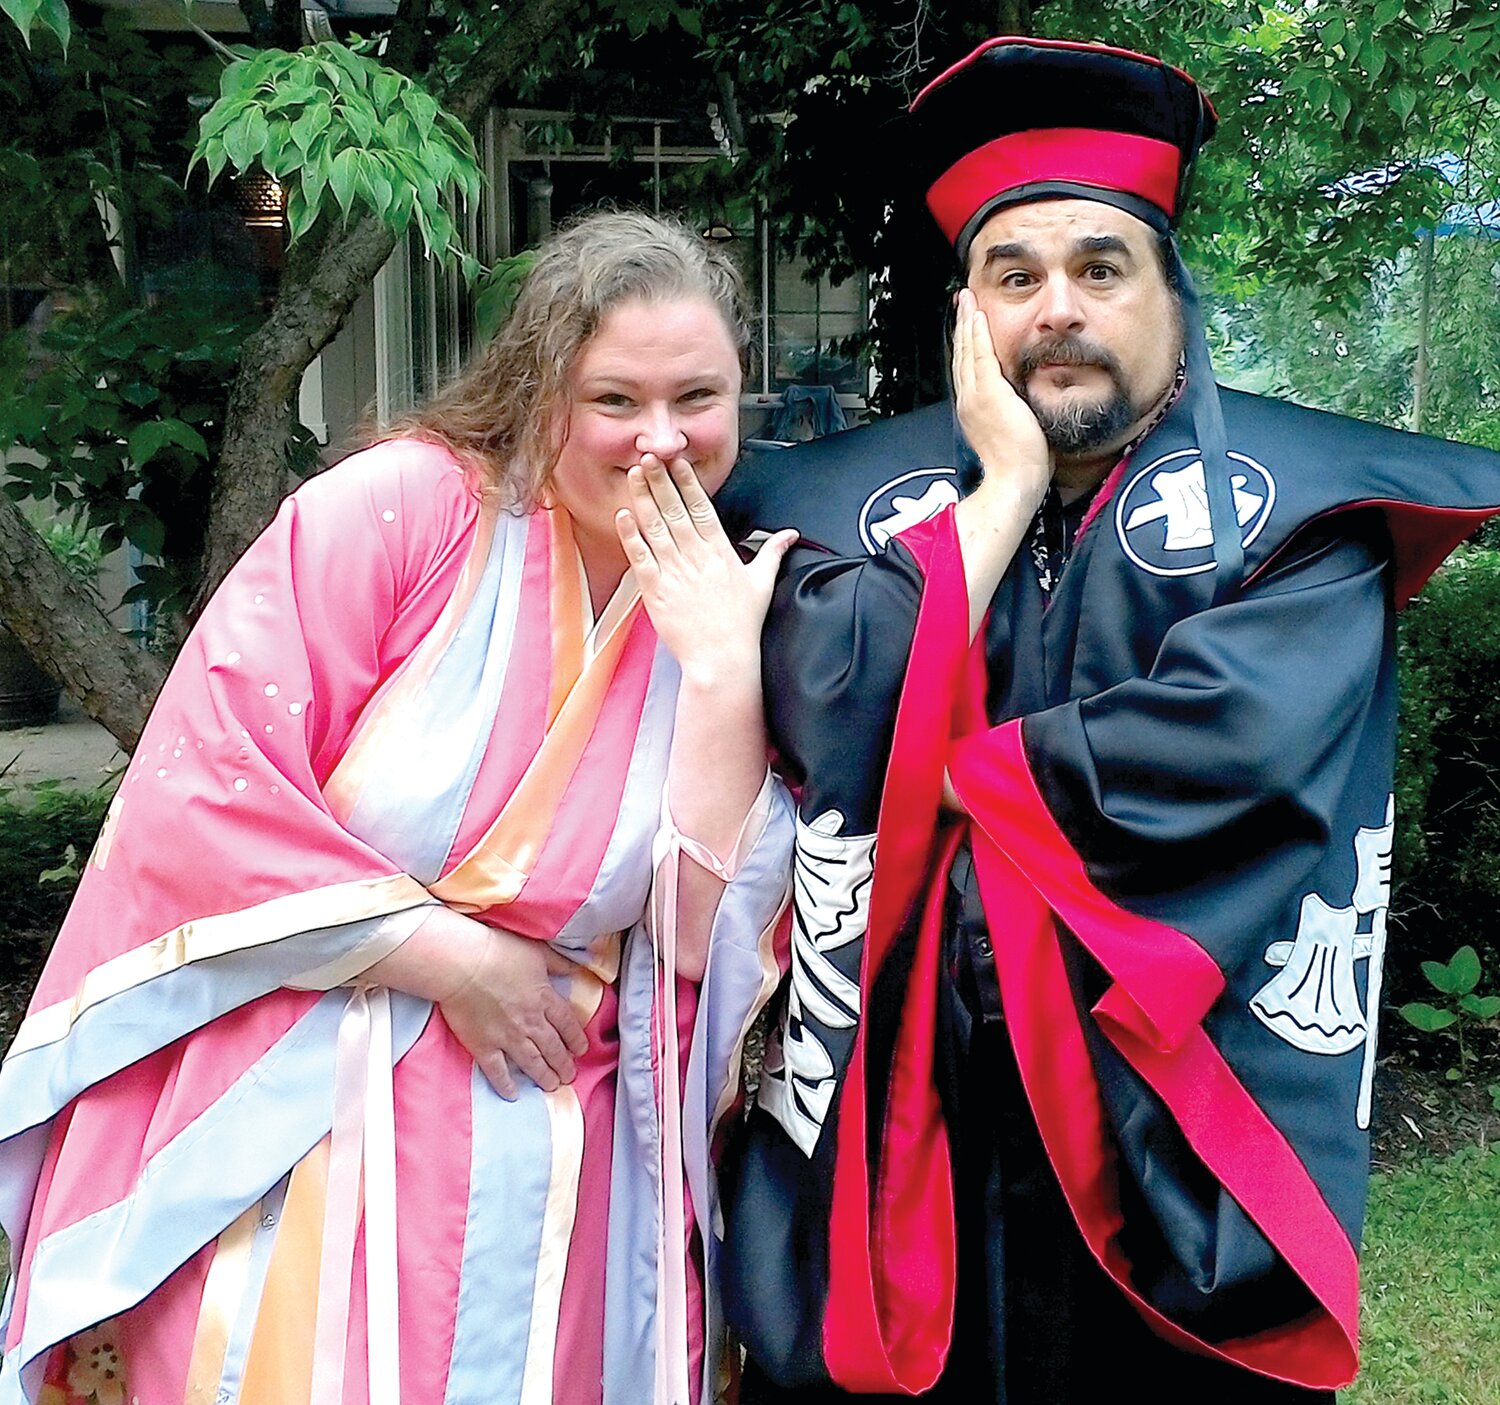 Alexandra Gilliam of Wyncote is the lovely Yum-Yum and Michael Schiumo of Horsham is Ko-Ko the bemused Lord High Executioner in the Bucks County Gilbert & Sullivan Society’s musical comedy “The Mikado.”